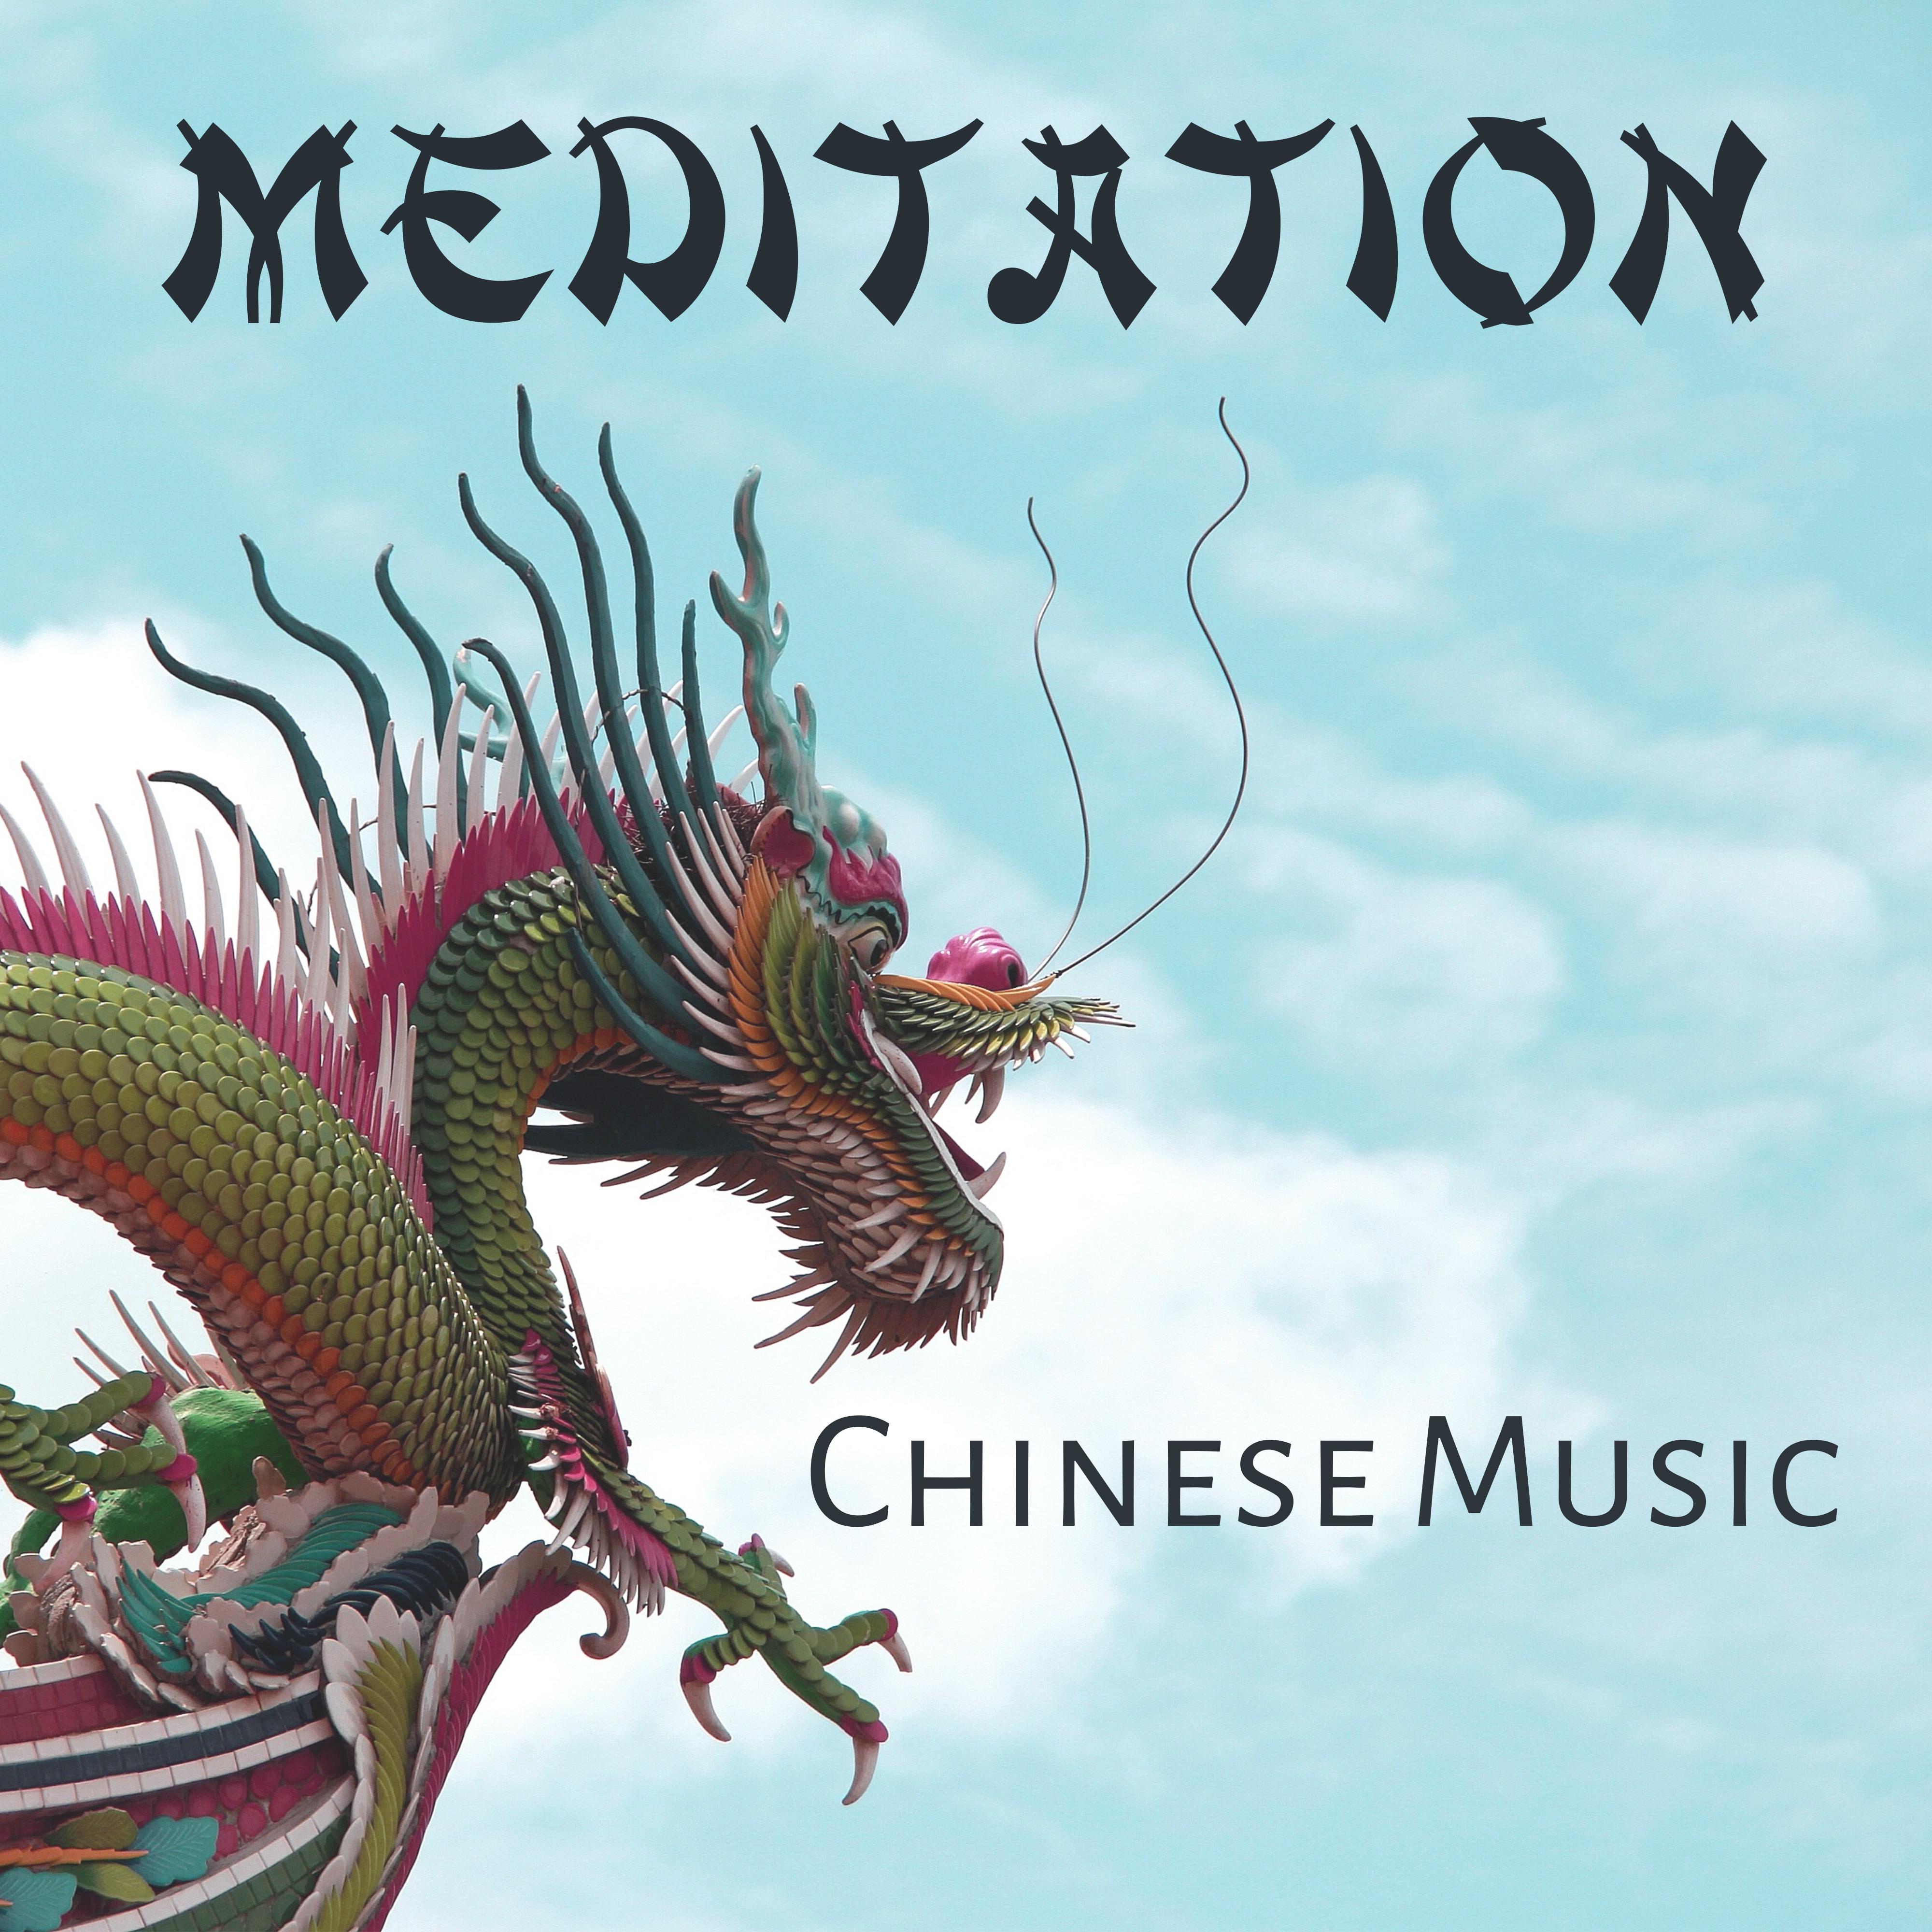 Meditation: Chinese Music – Calming Music to Meditate, New Age Relaxation, Chinese Songs